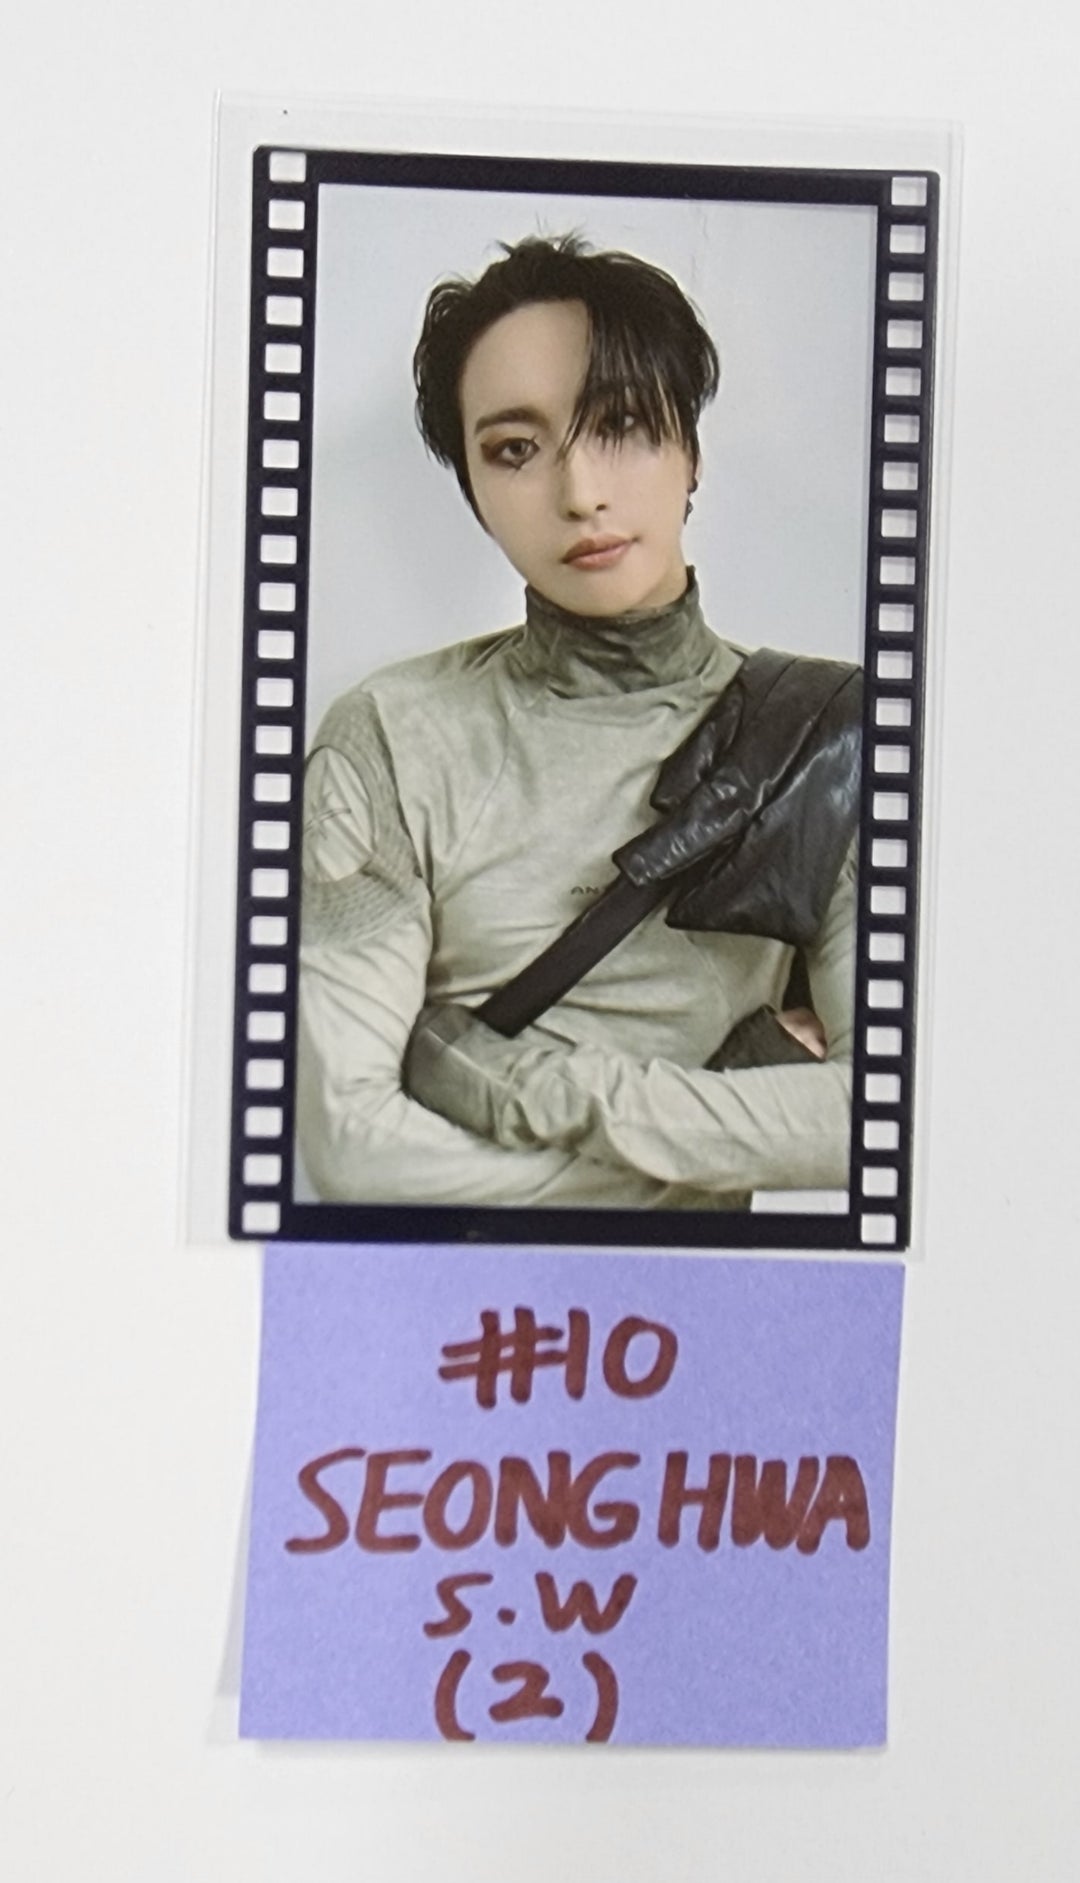 ATEEZ "THE WORLD EP.2 " - Soundwave Fansign Event photocard, Film Photocard